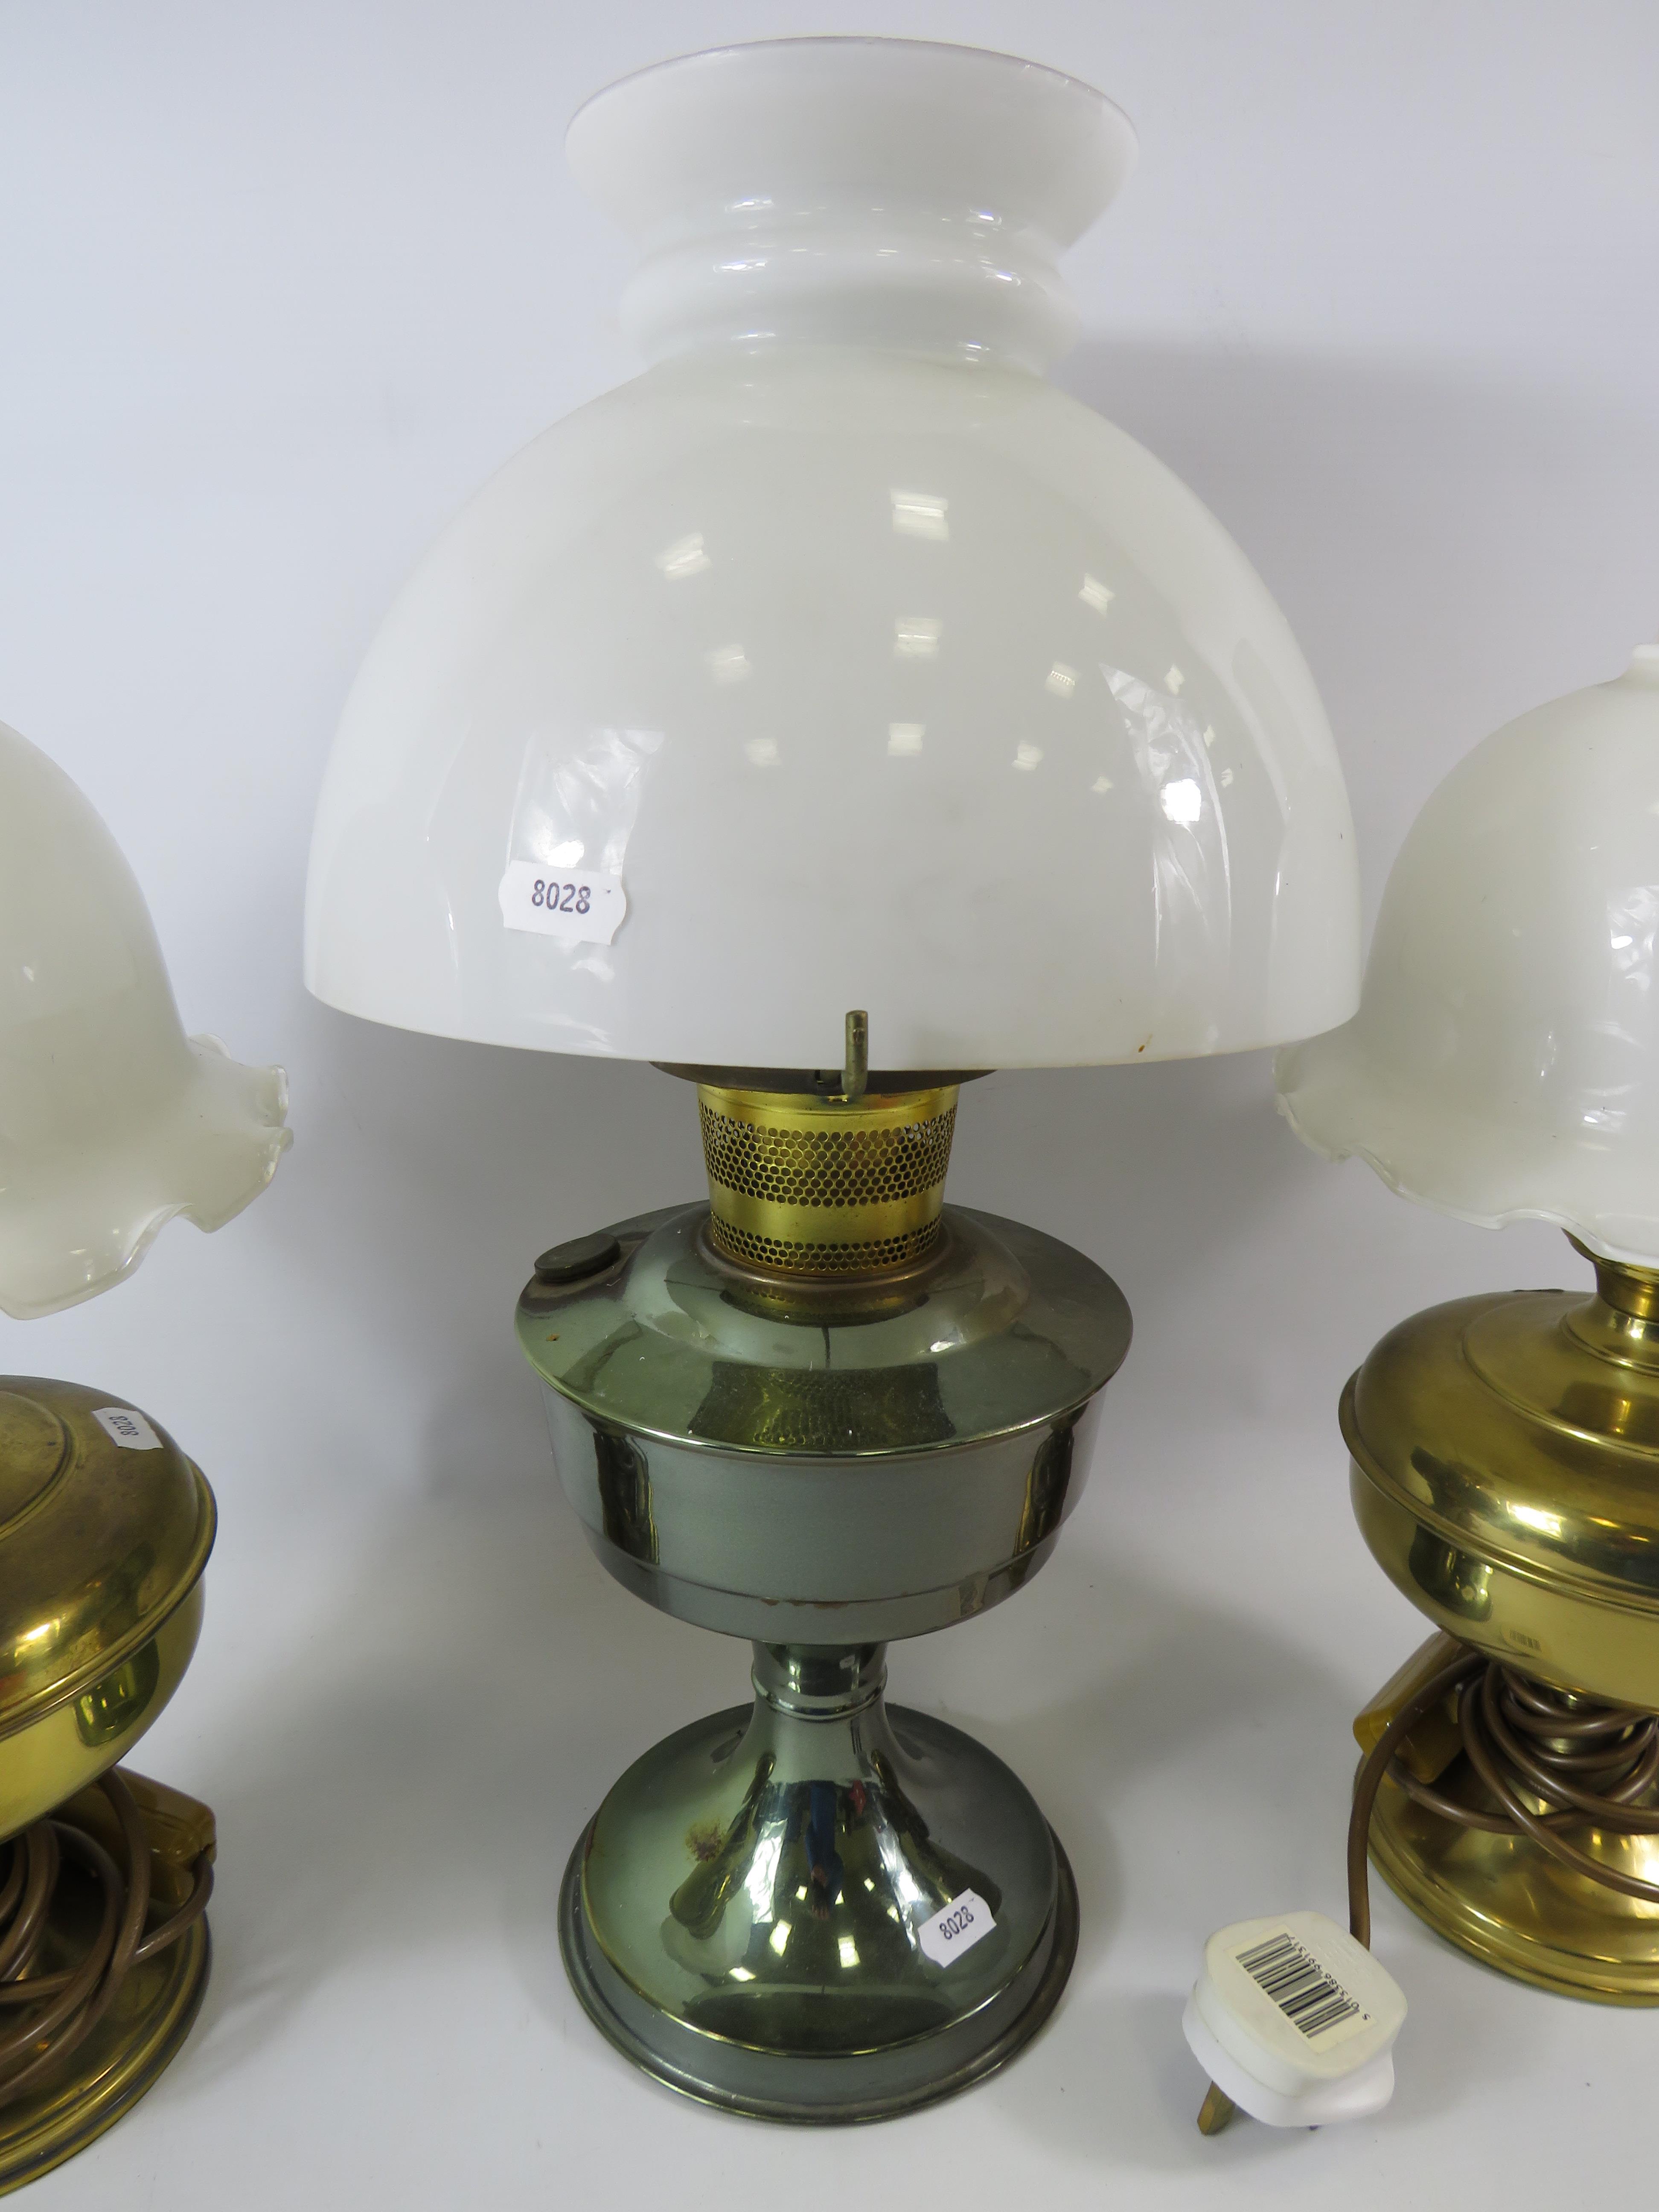 Aladdin oil lamp plus 2 converted to electric oil lamps. - Image 2 of 2